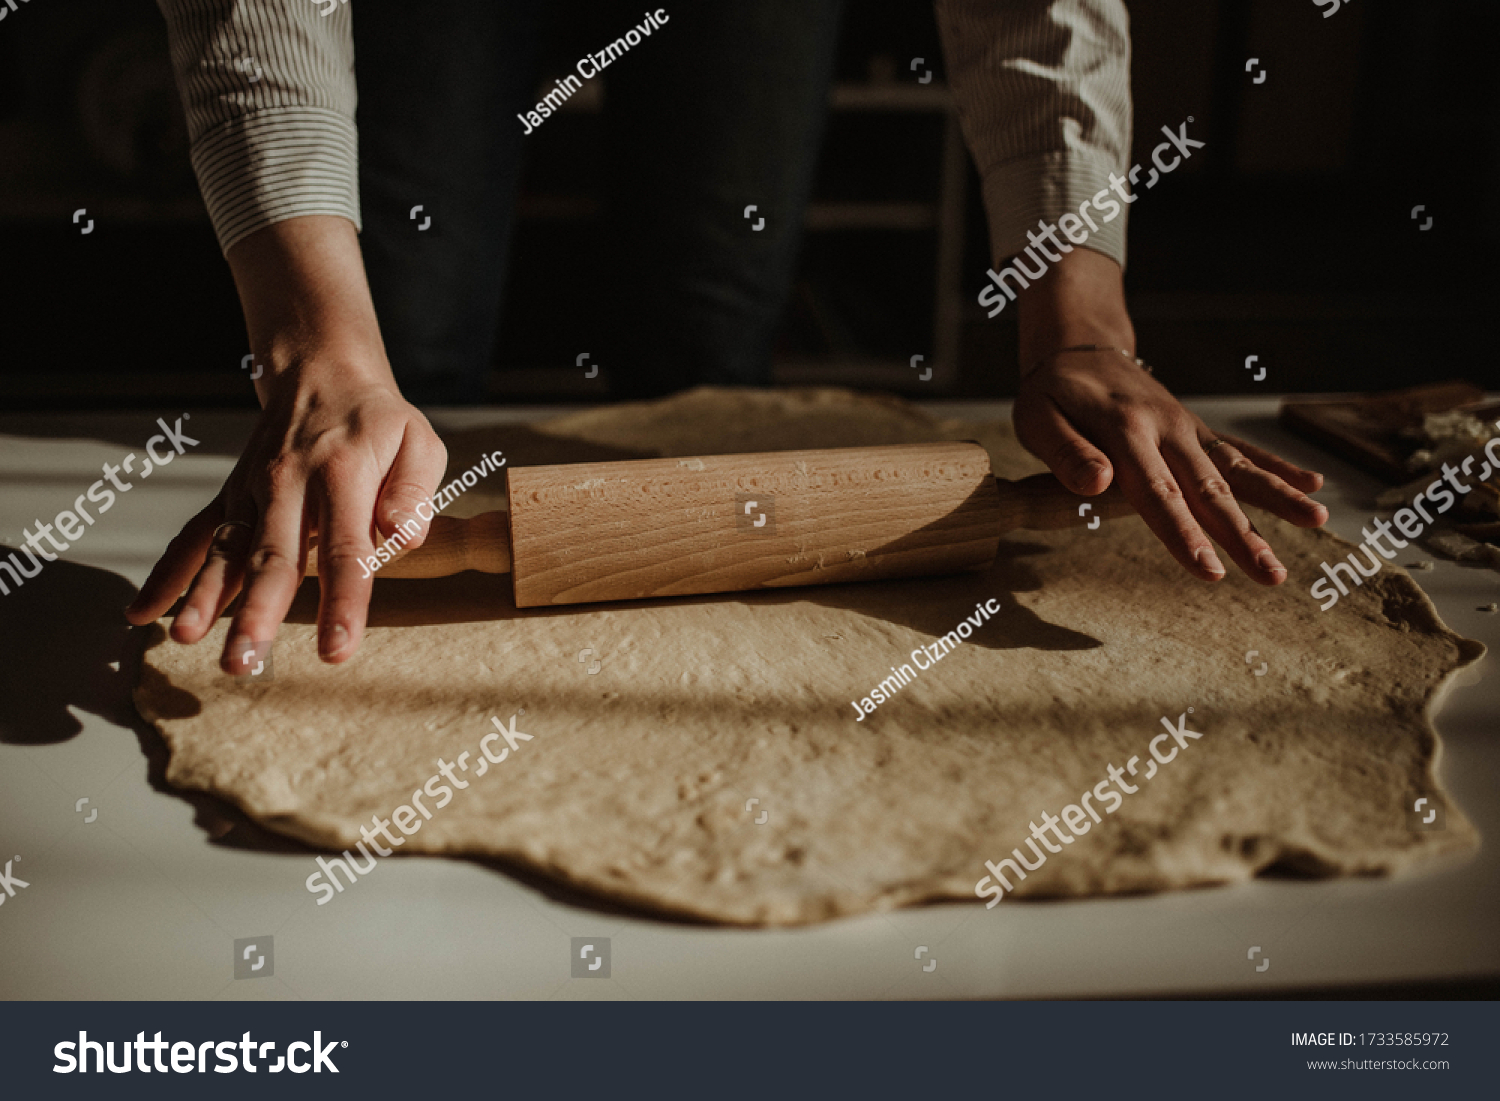 Wife making a homemade doughy pastry food with smoked cheese during Ramadan for dinner during the sunset light in the home on the wooden table #1733585972